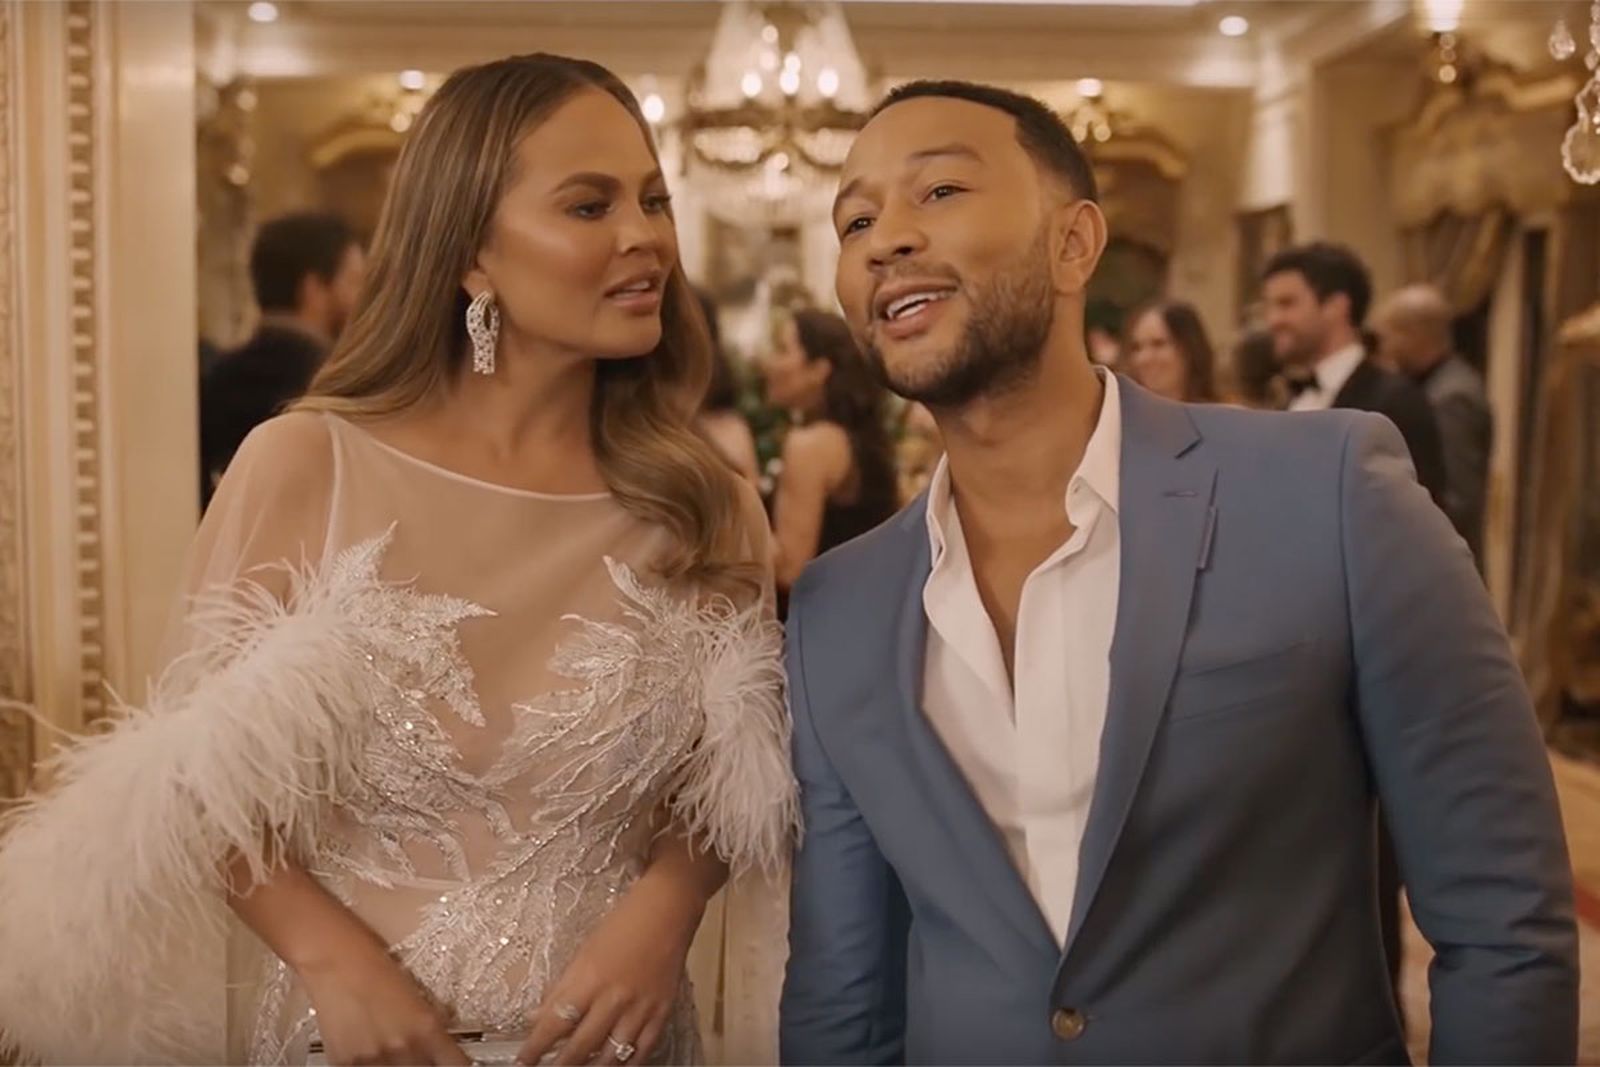 John Legend and Chrissy Teigen in Genesis ad for the super bowl